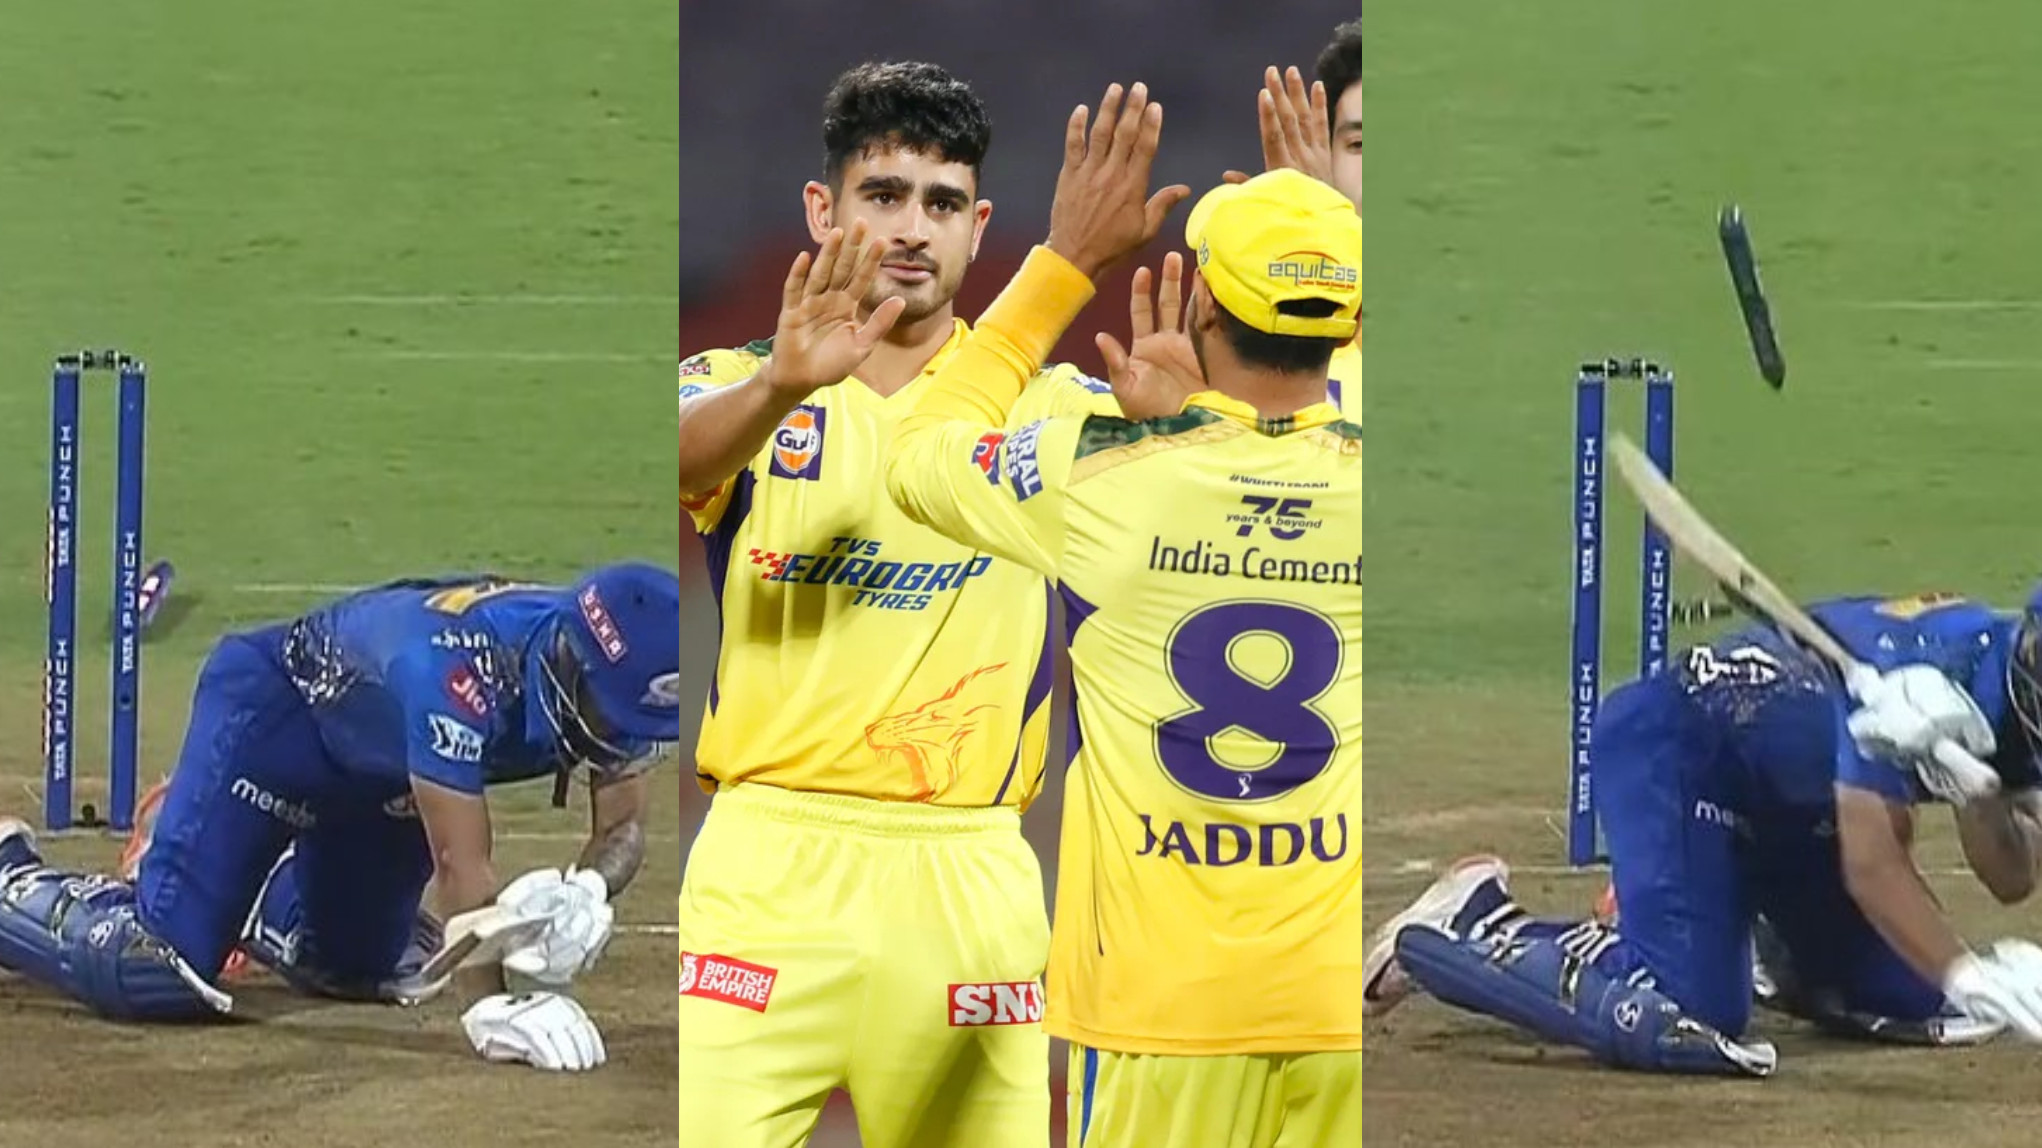 IPL 2022: WATCH- Ishan Kishan falls to his knees as Mukesh Choudhary bowls him with a top delivery